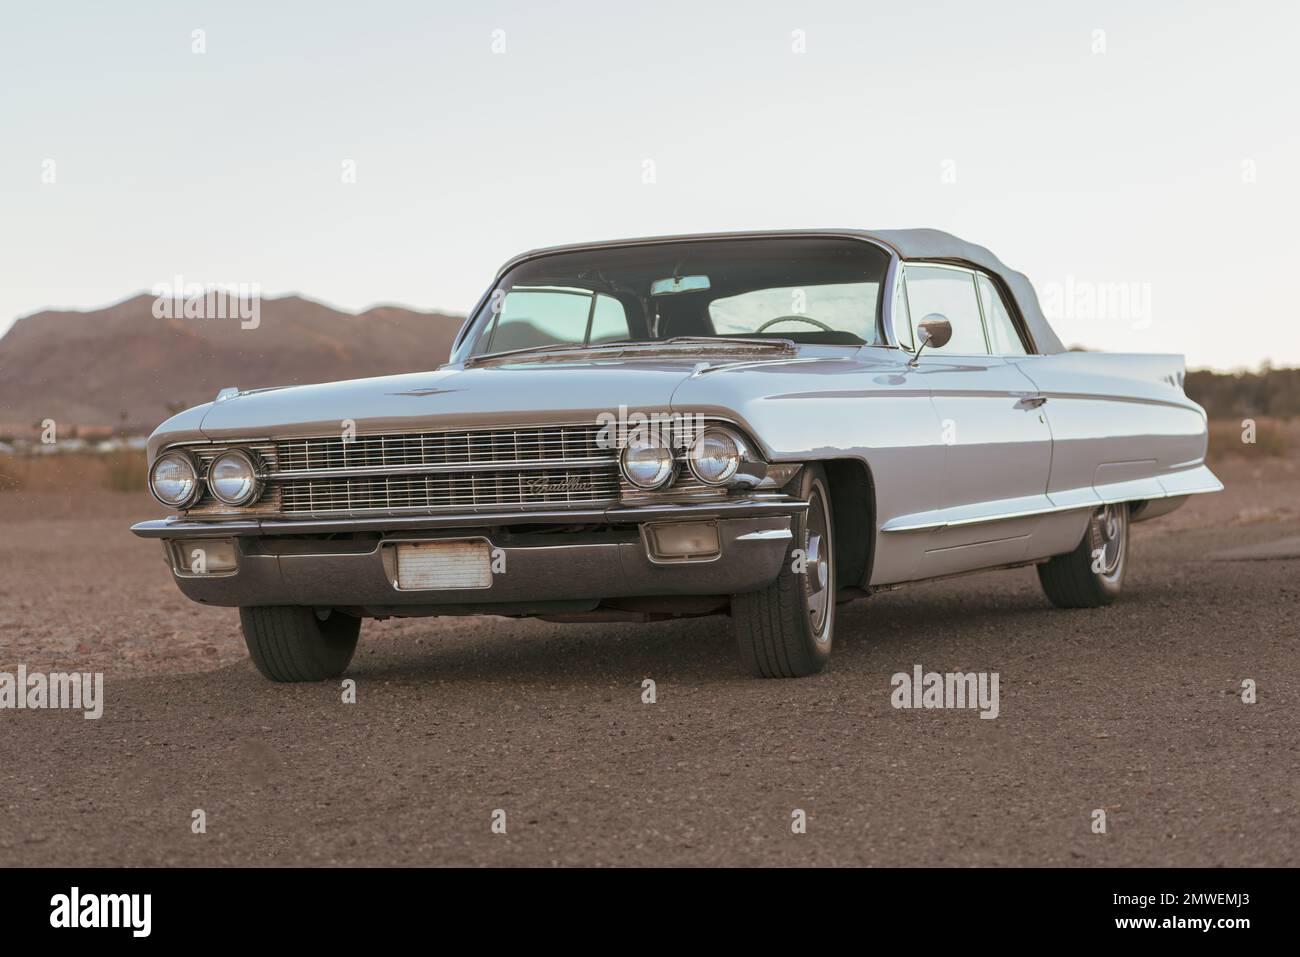 Lake Mead, Nevada, United States - November 17, 2022: classic, 1960s convertible Cadillac shown on a late afternoon parked by Lake Mead. Stock Photo